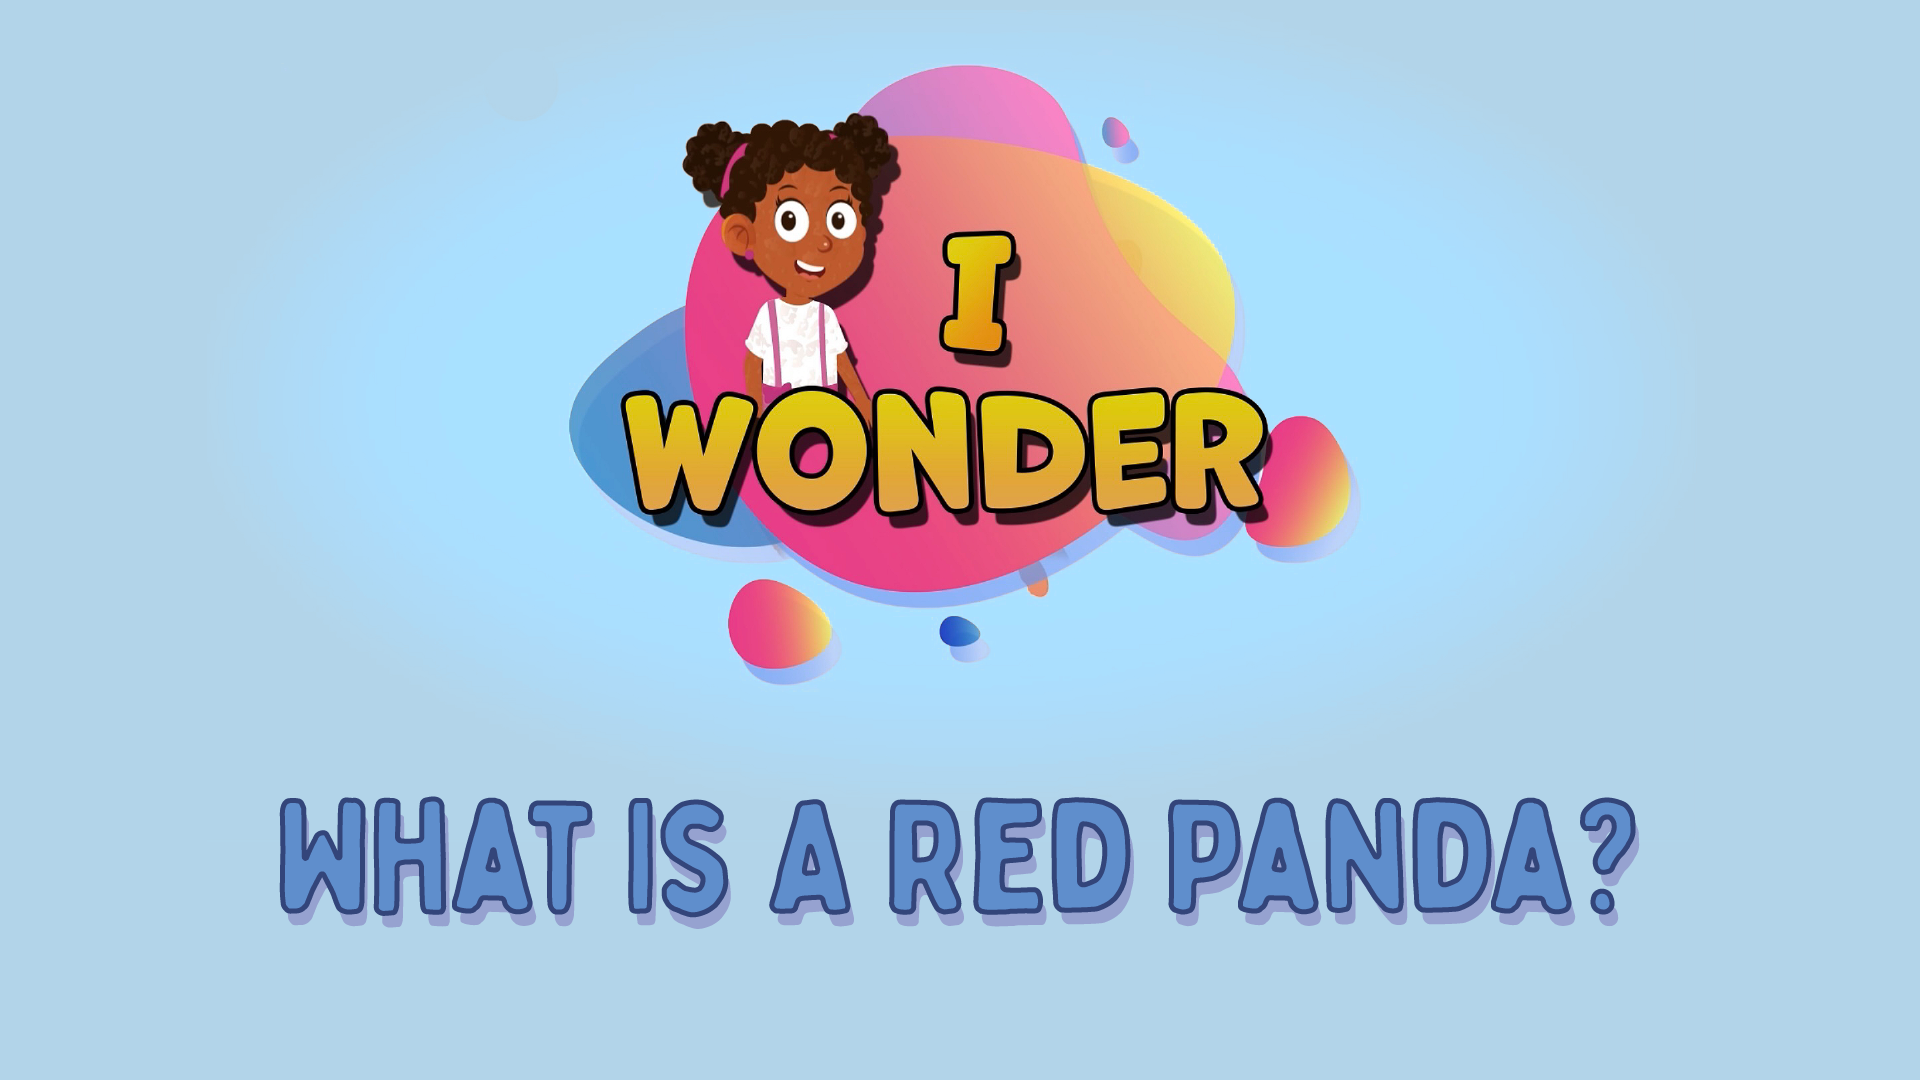 What Is A Red Panda?